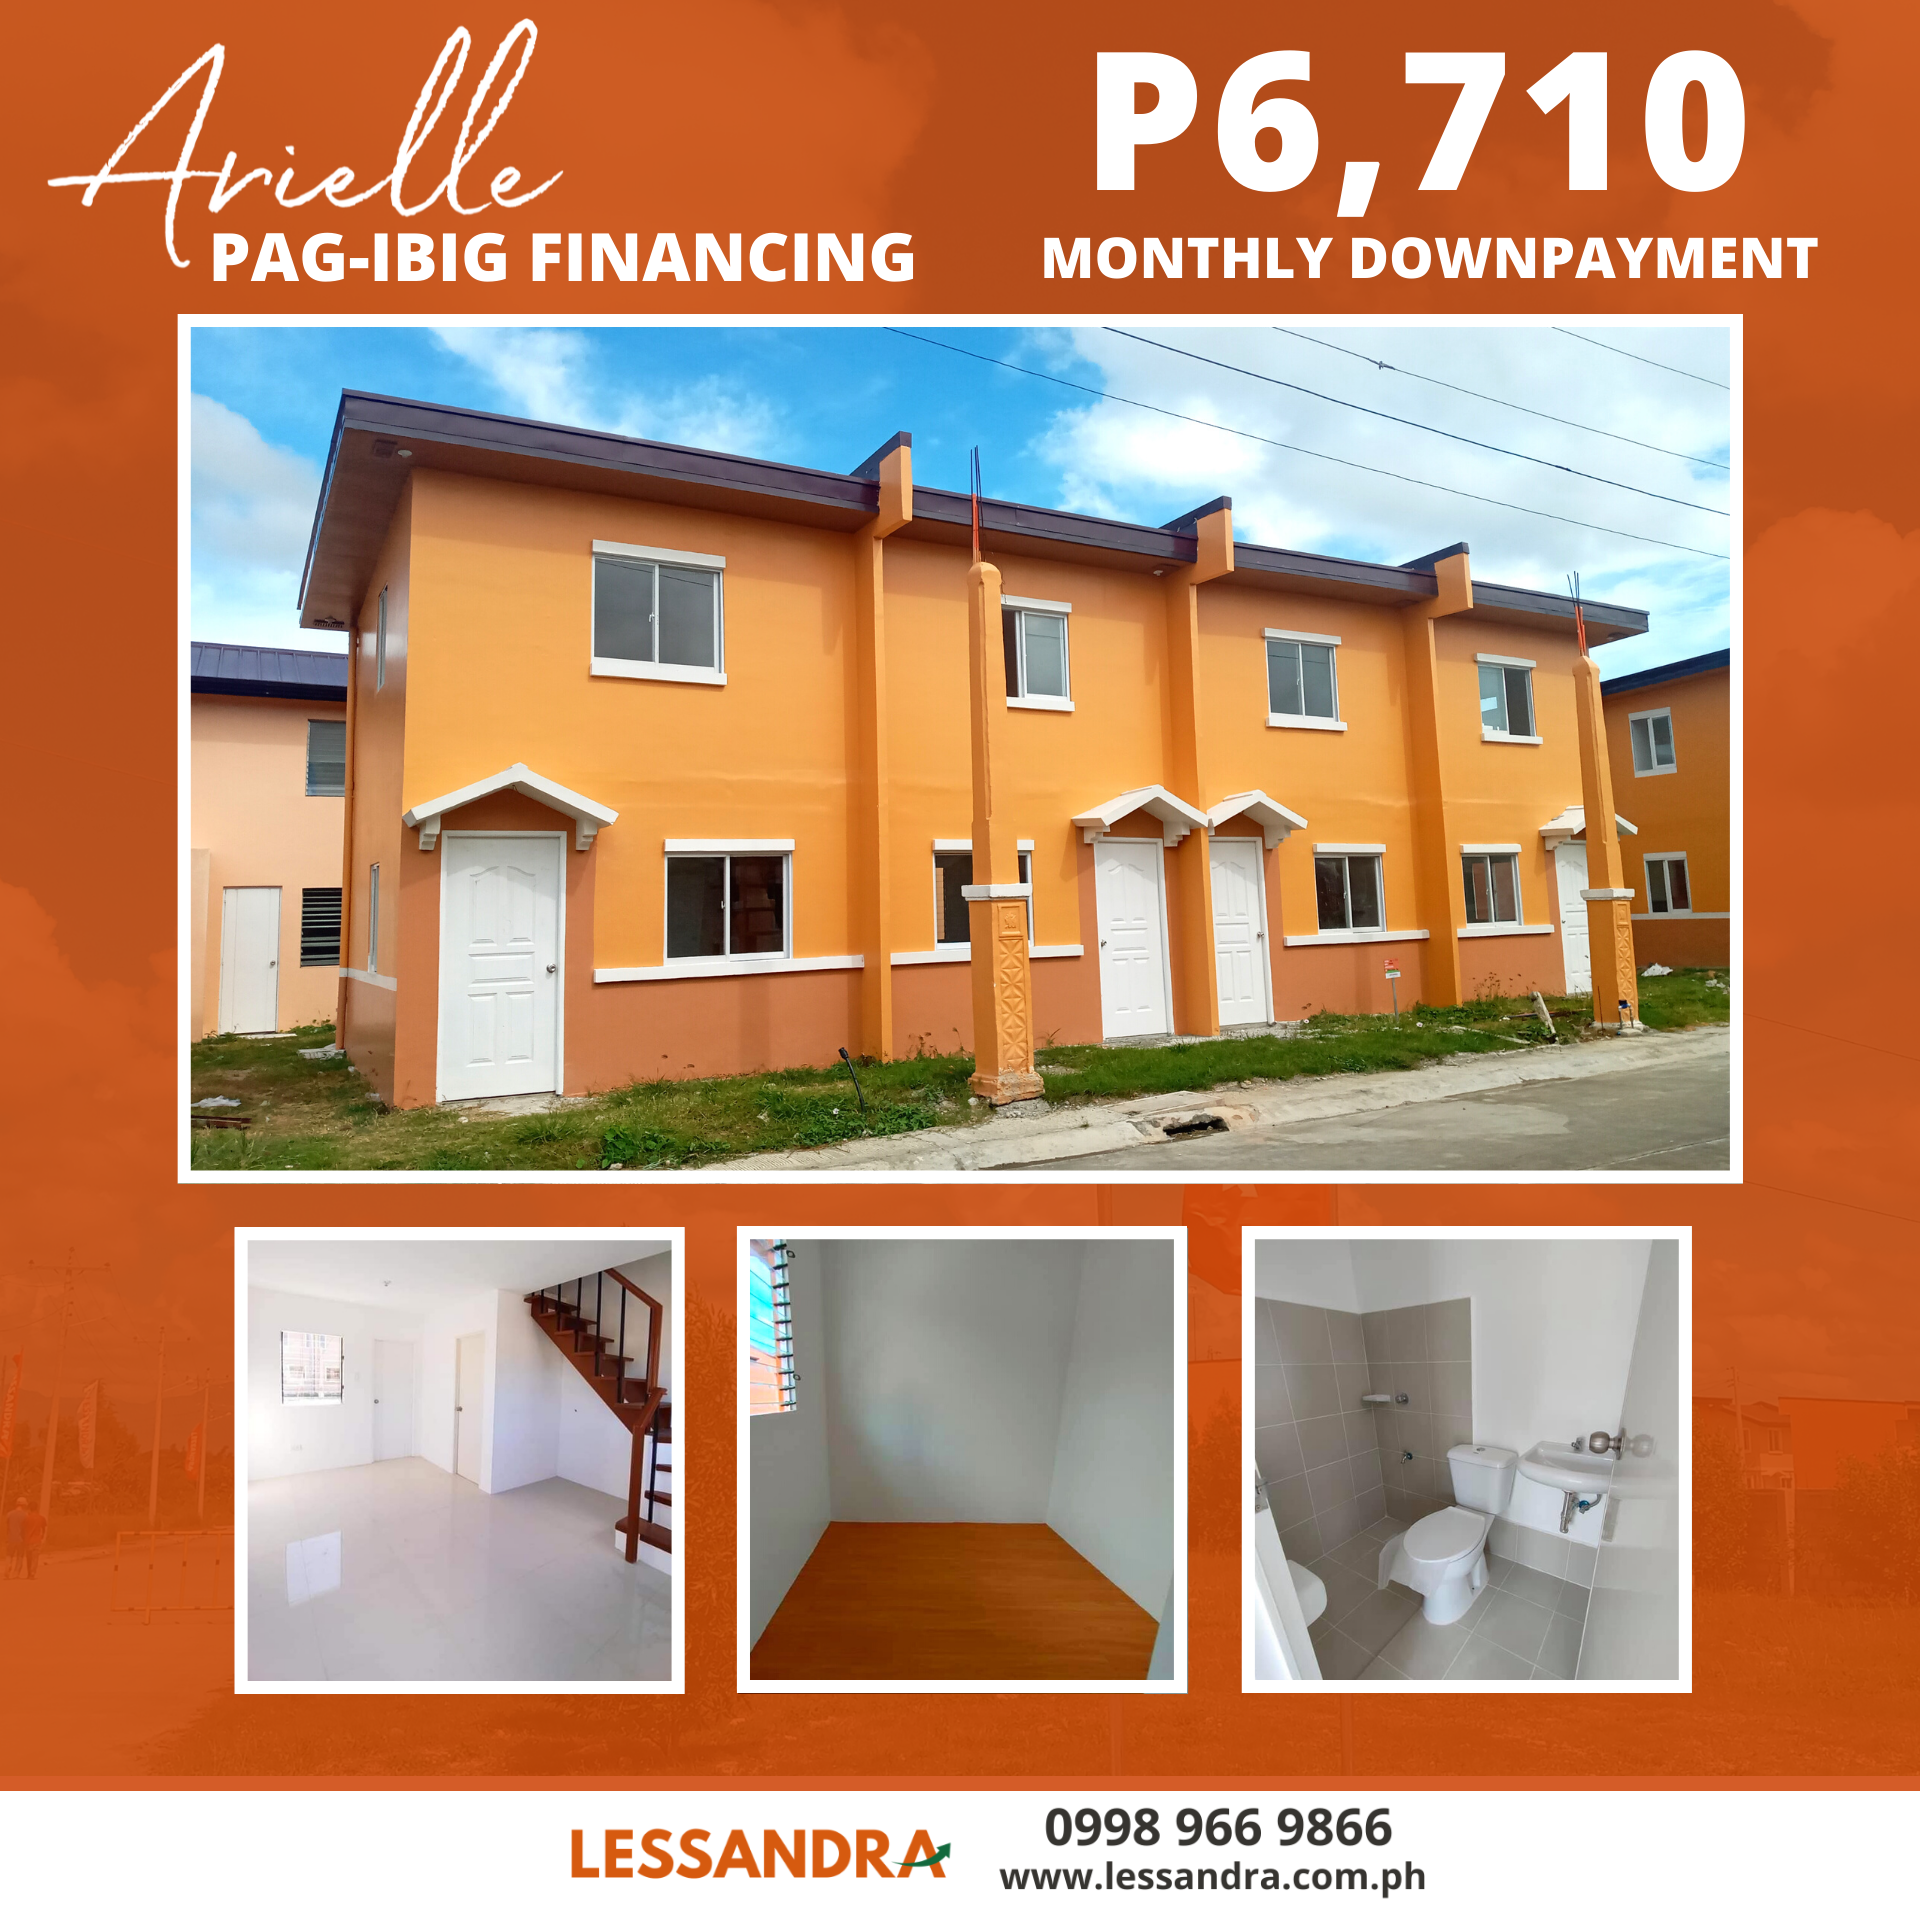 HOUSE AND LOT through PAG-IBIG FINANCING in ILOILO